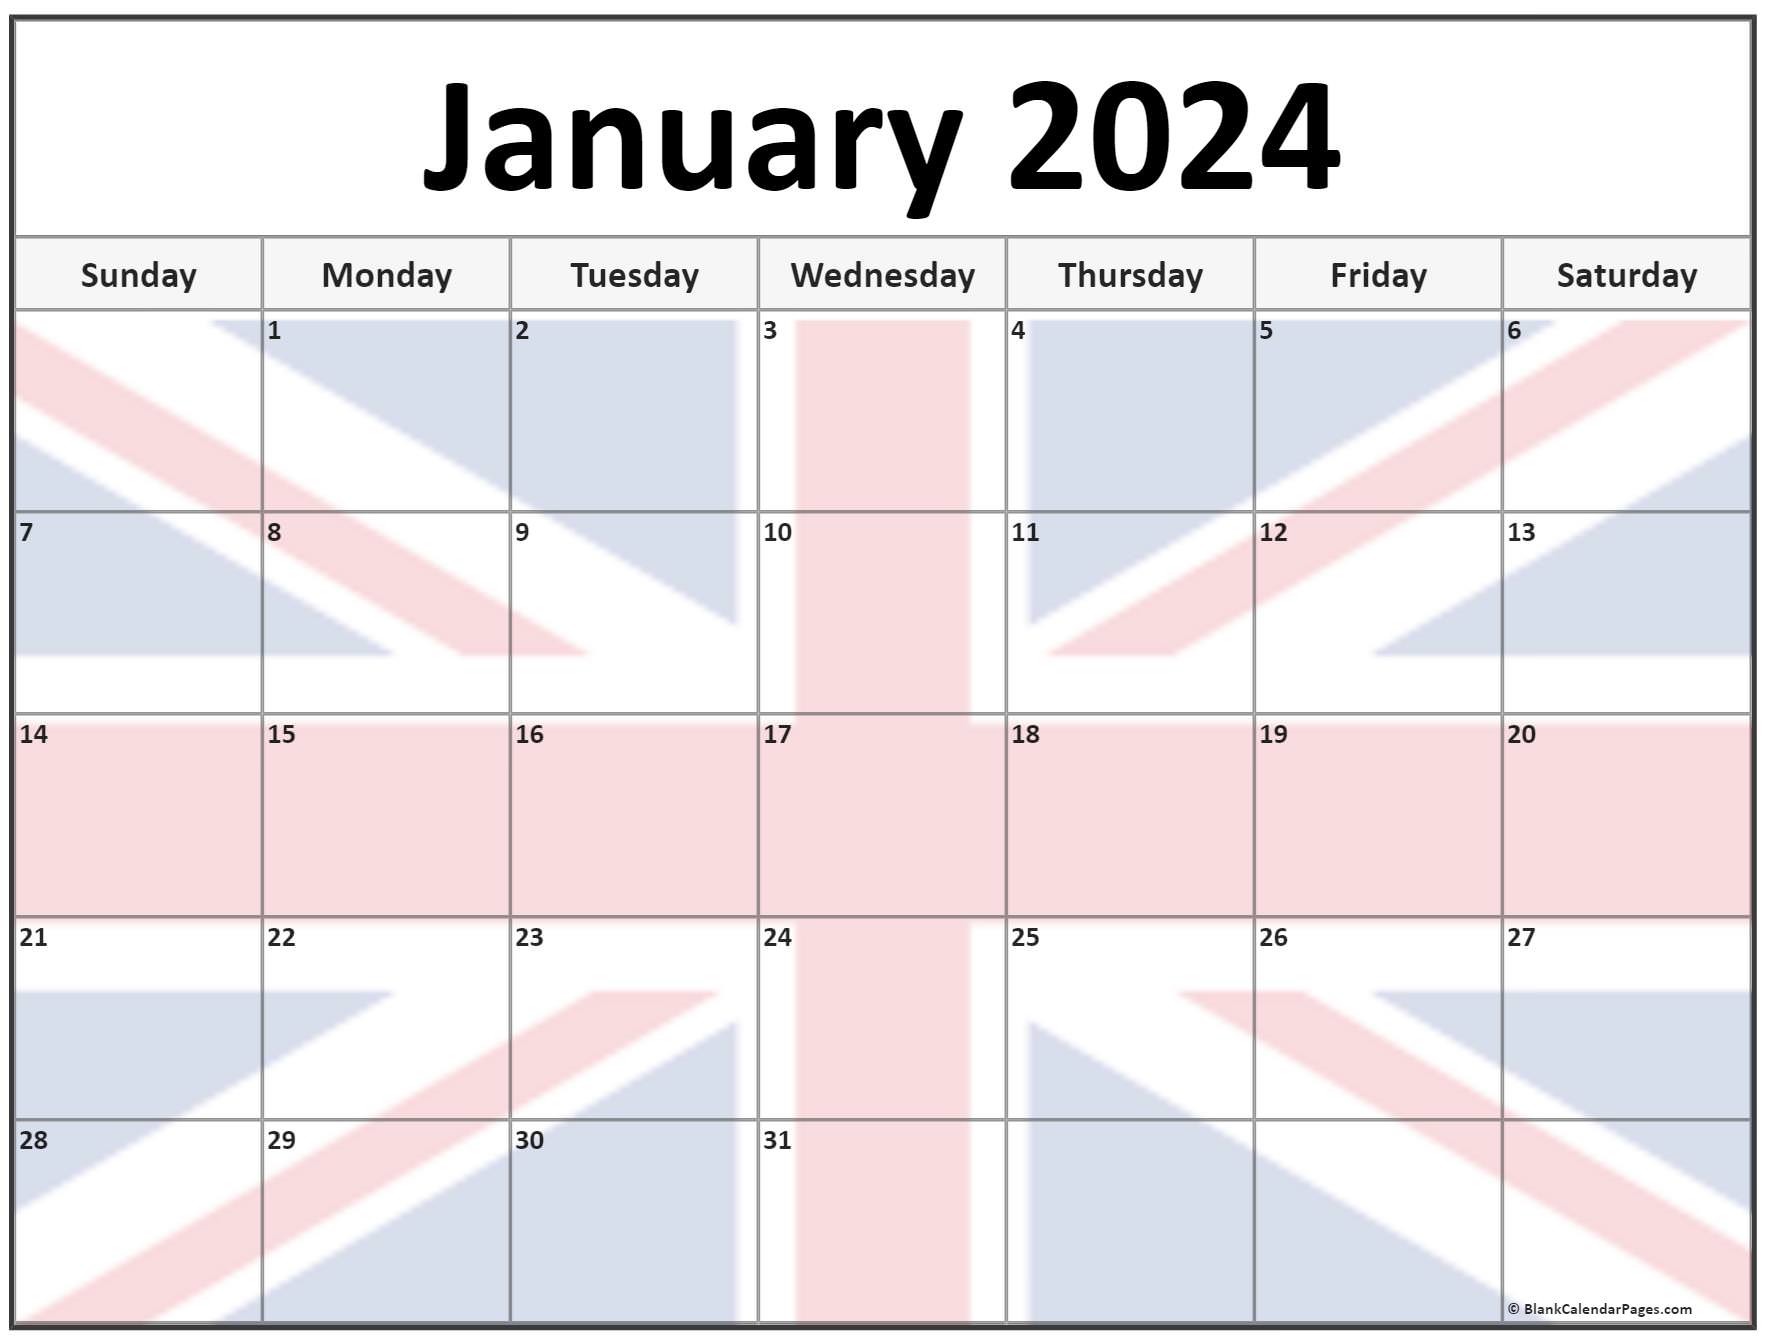 collection-of-january-2024-photo-calendars-with-image-filters